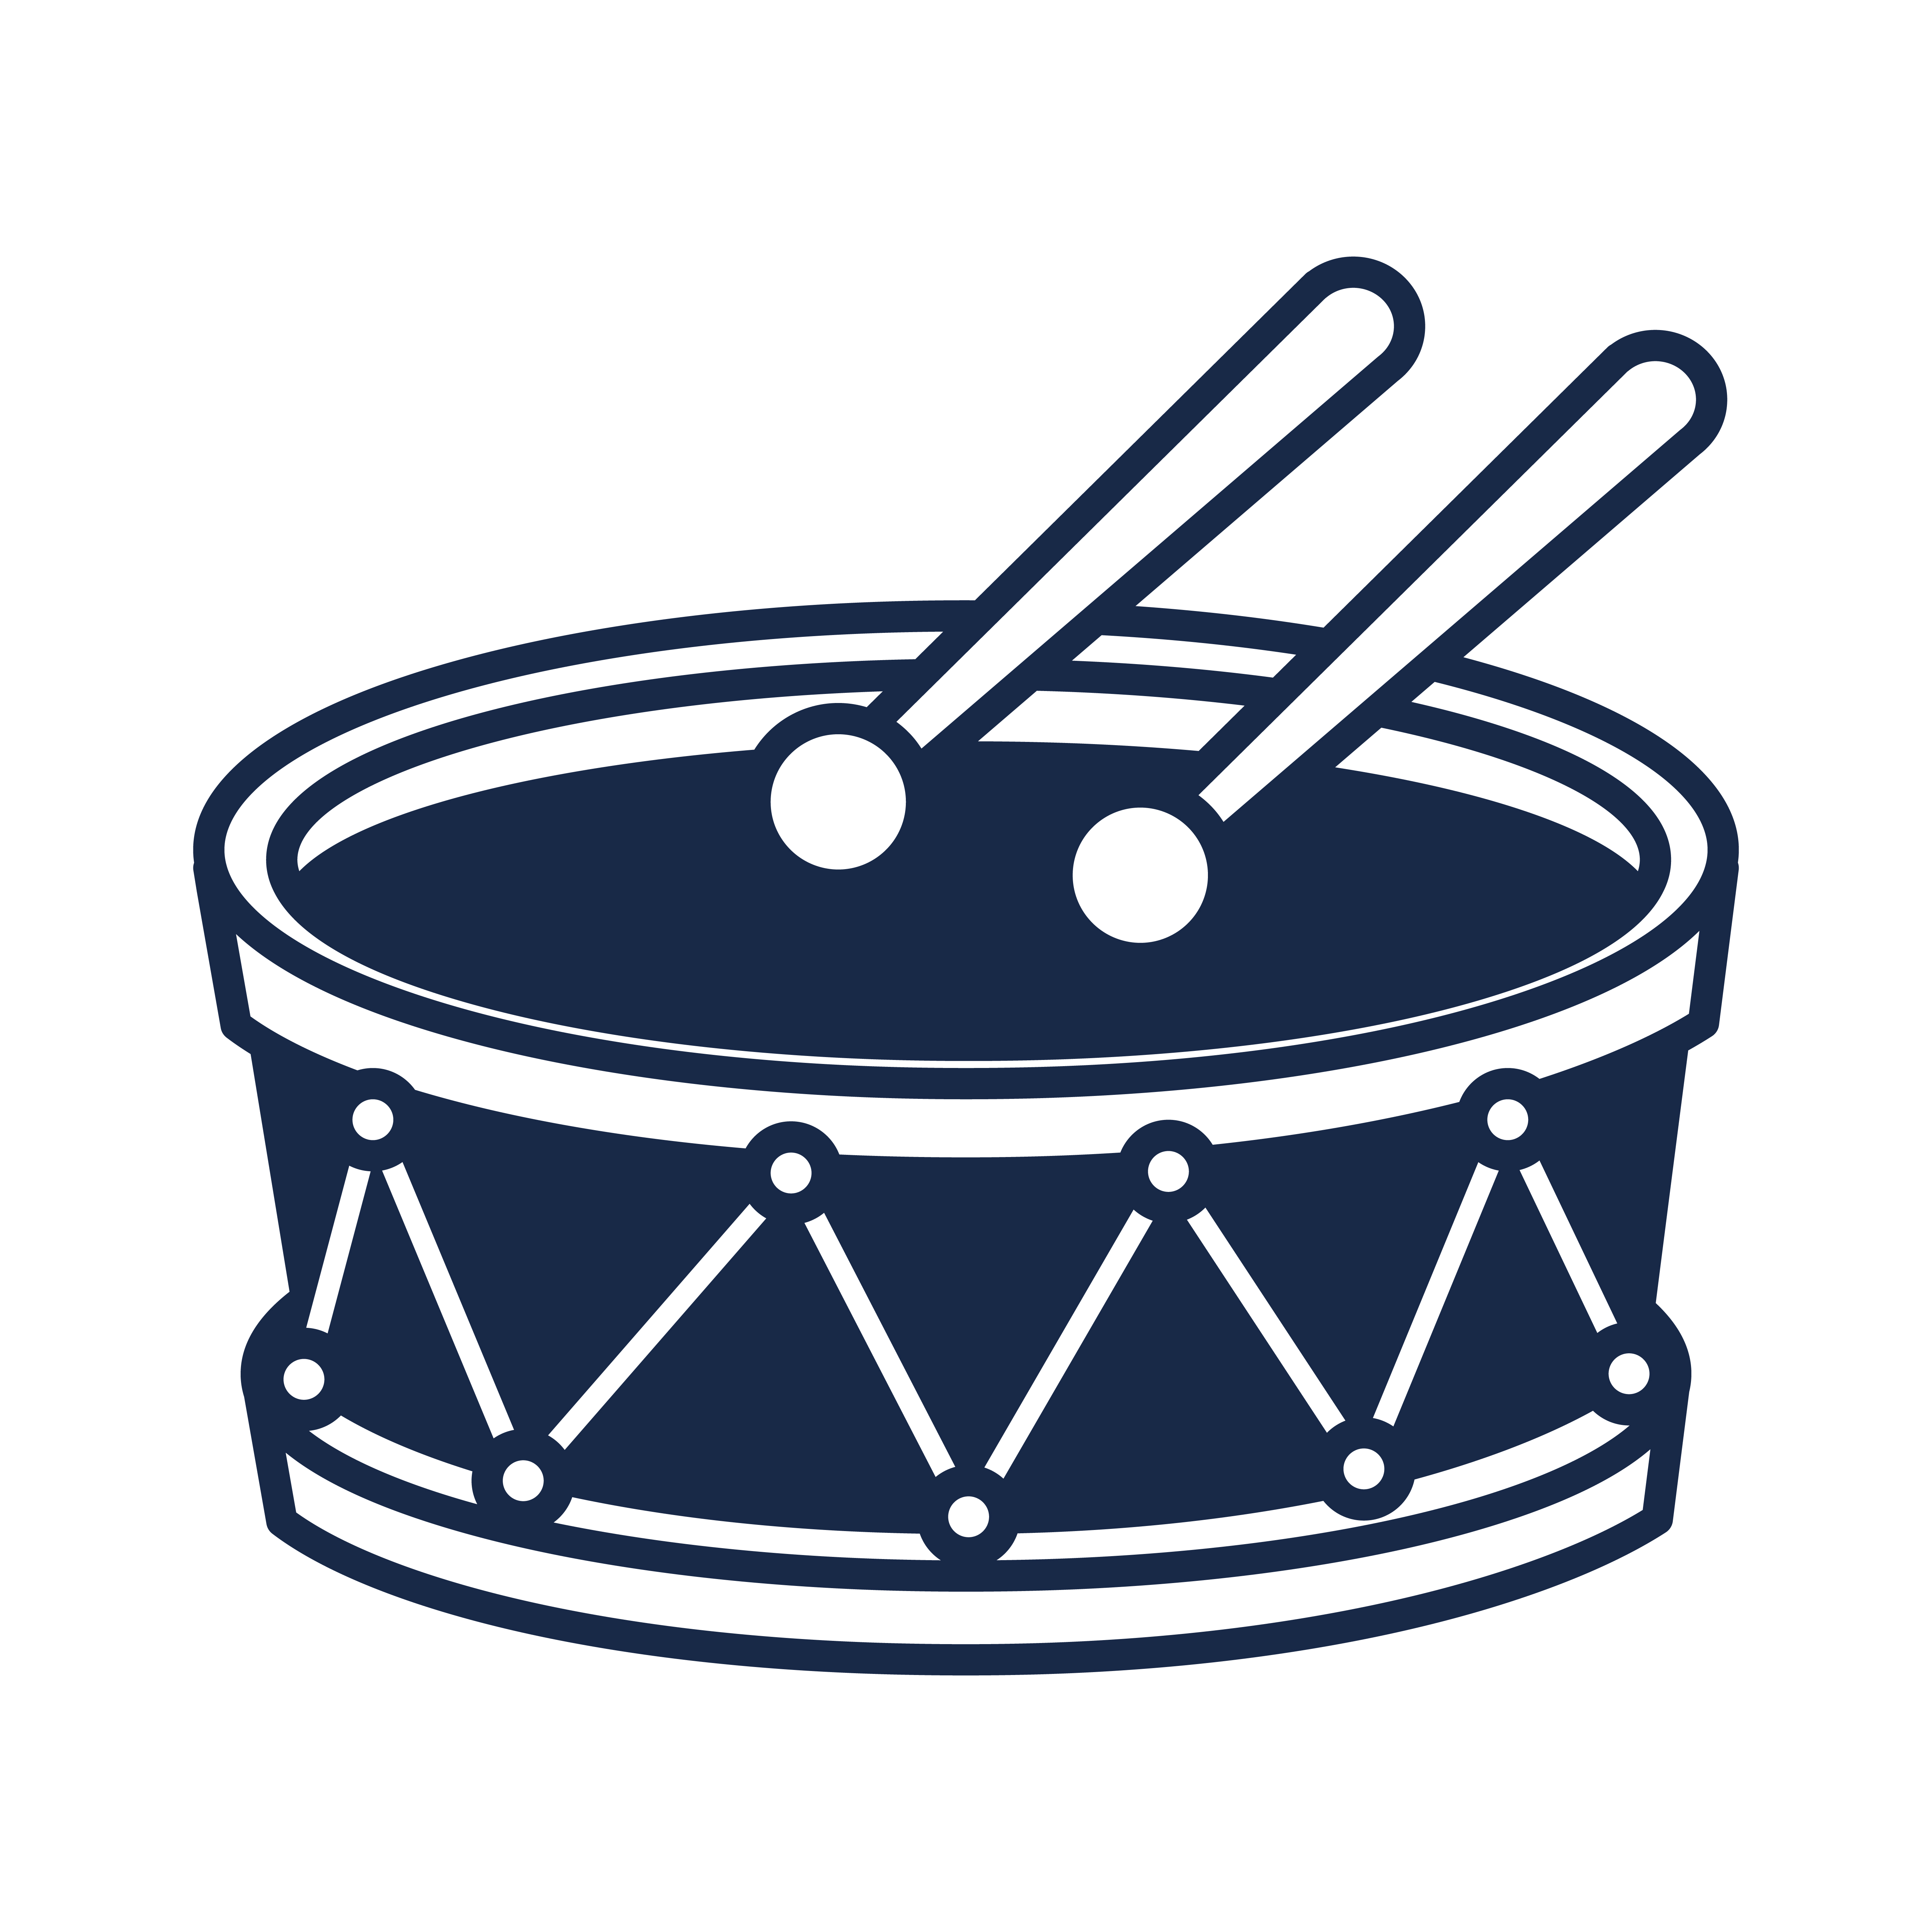 Bass drum and drumsticks. Musical instrument. Vector clipart